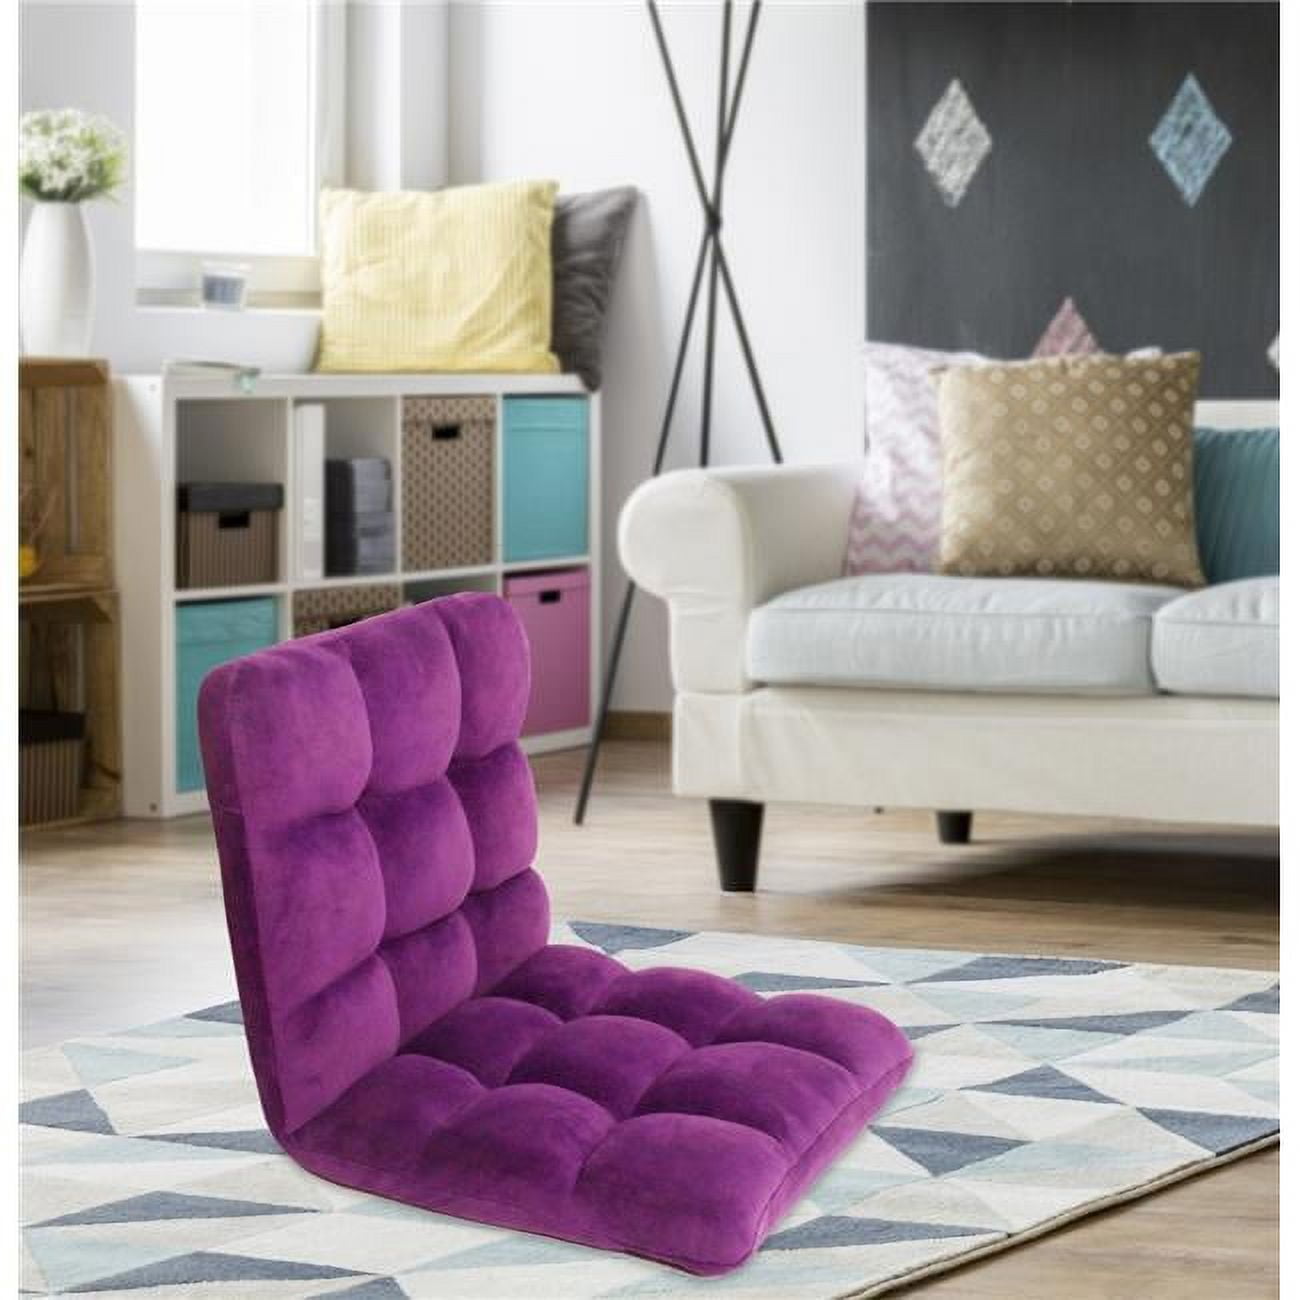 Frc2741-us Urban Microfiber Modern Contemporary Armless Quilted Purple Recliner Chair